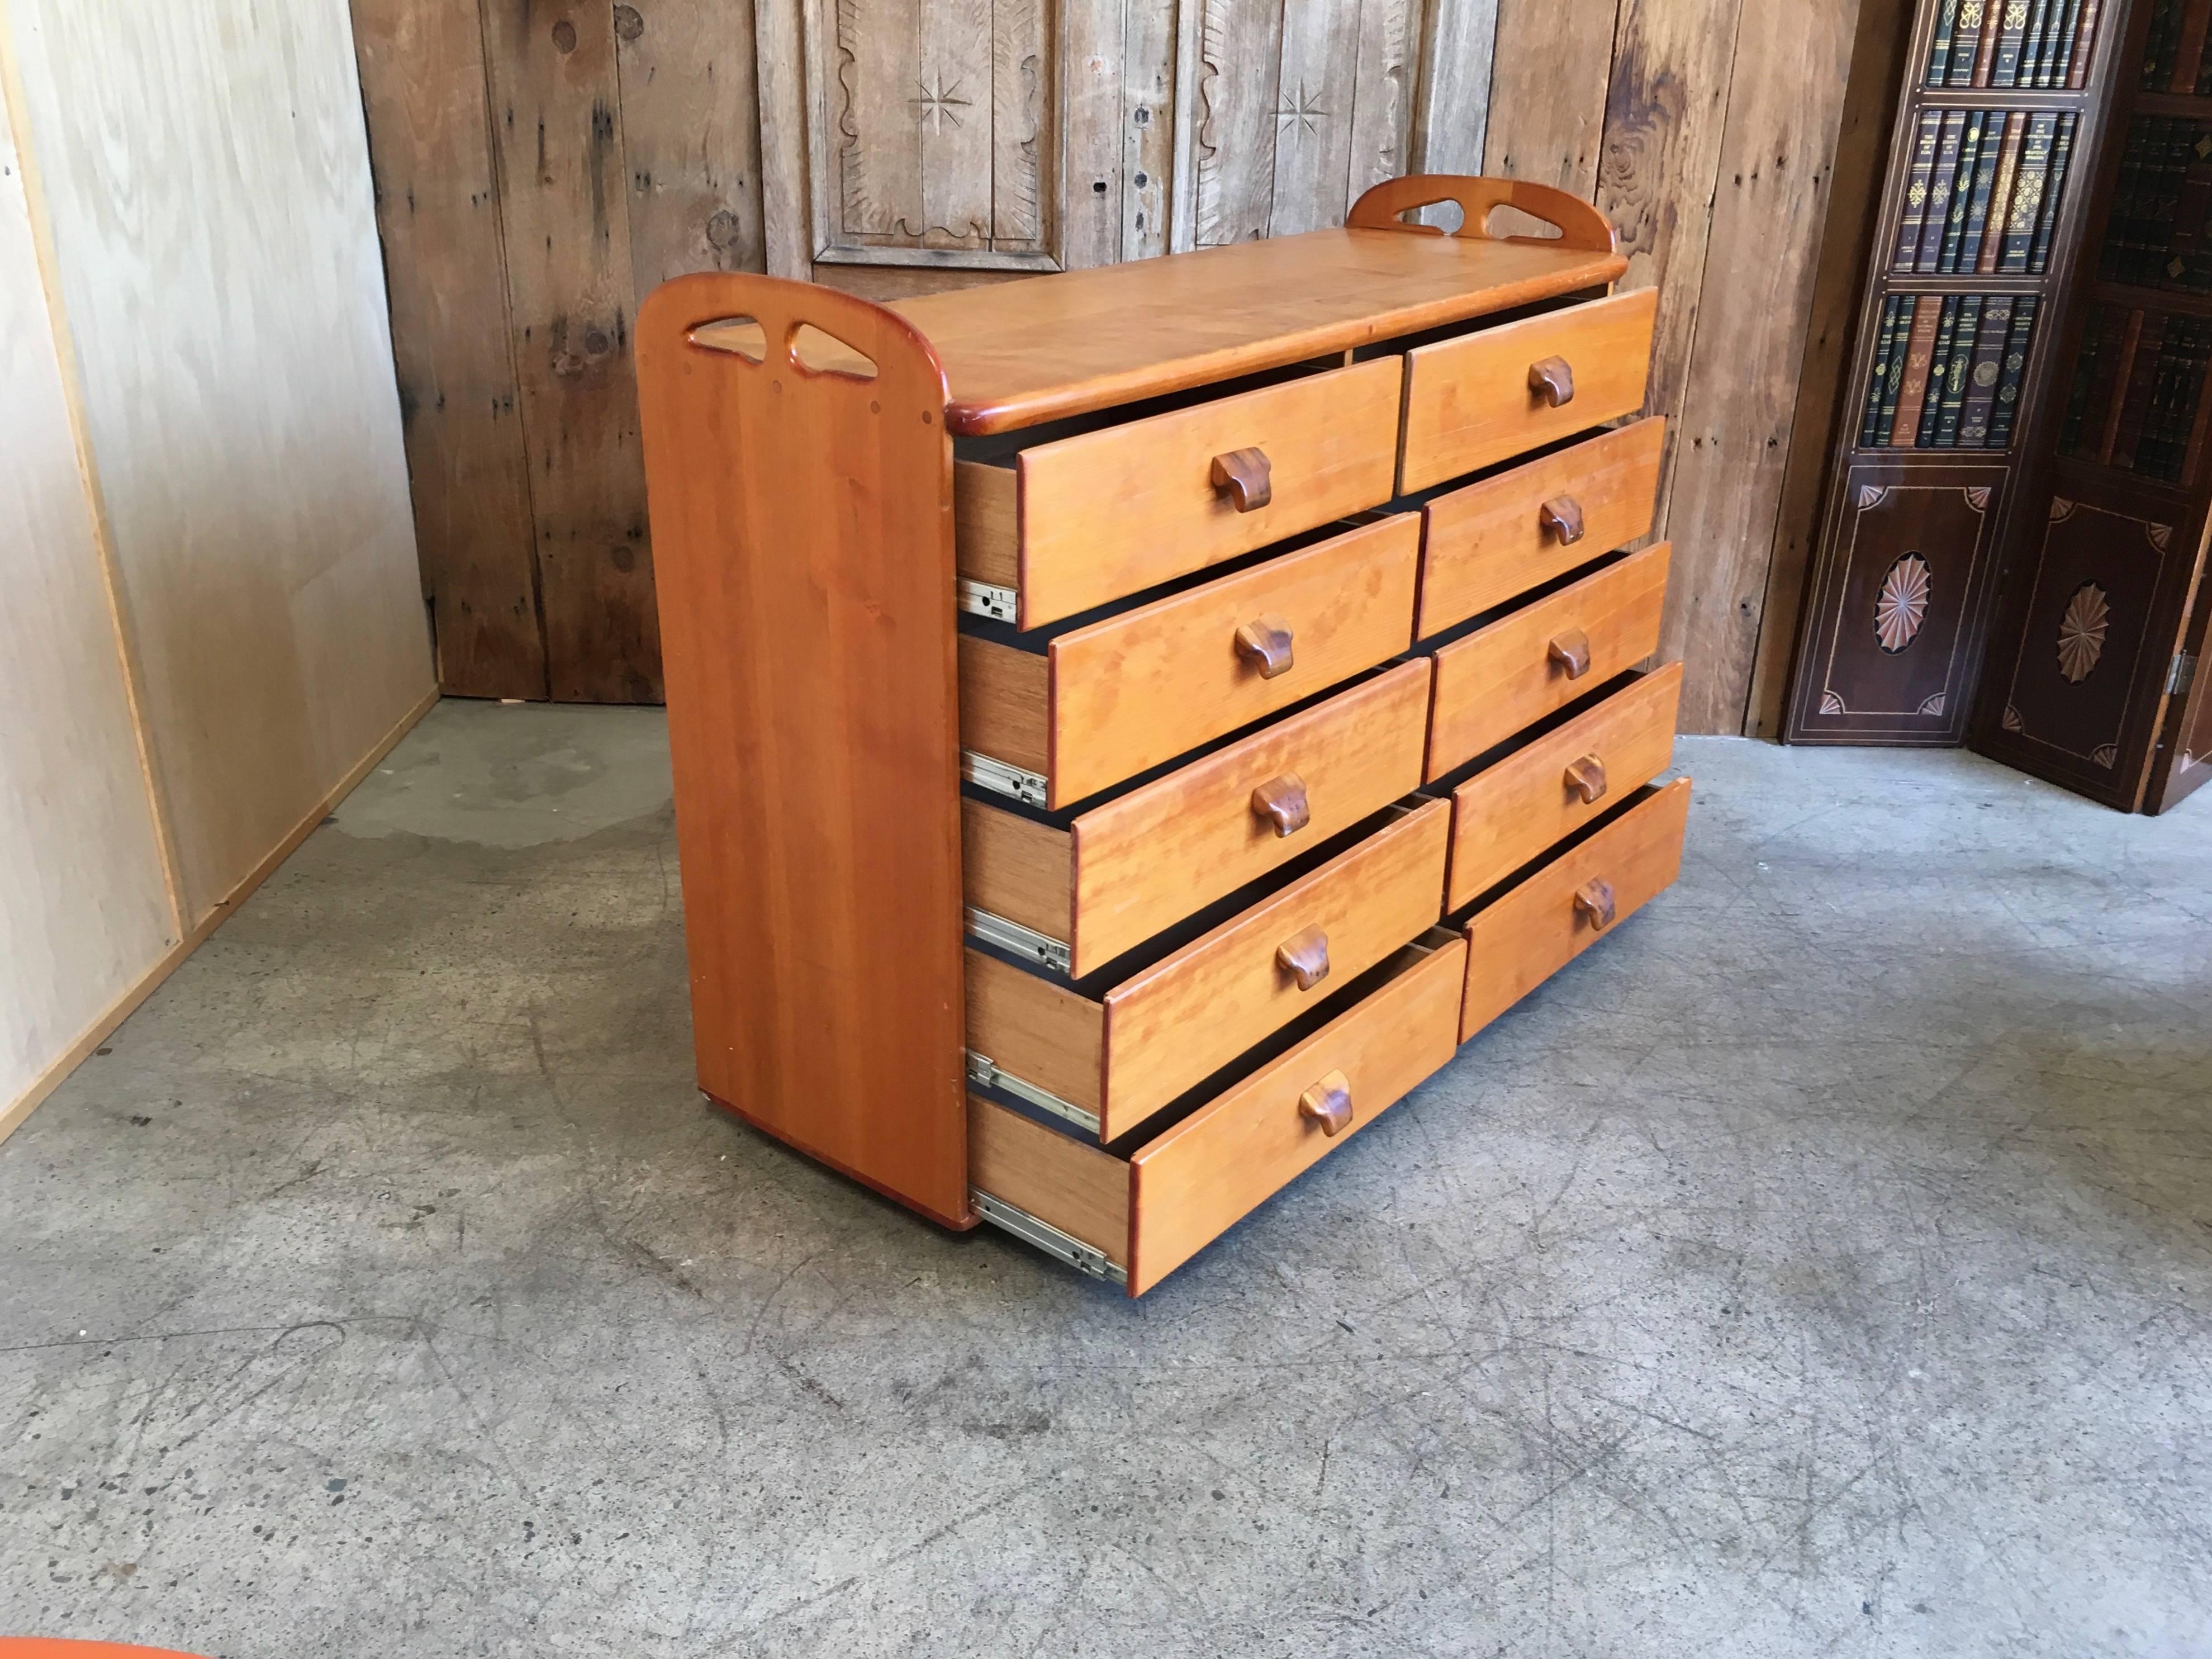 North American Handcrafted Pine Dresser with Koa Wood Drawer Pulls